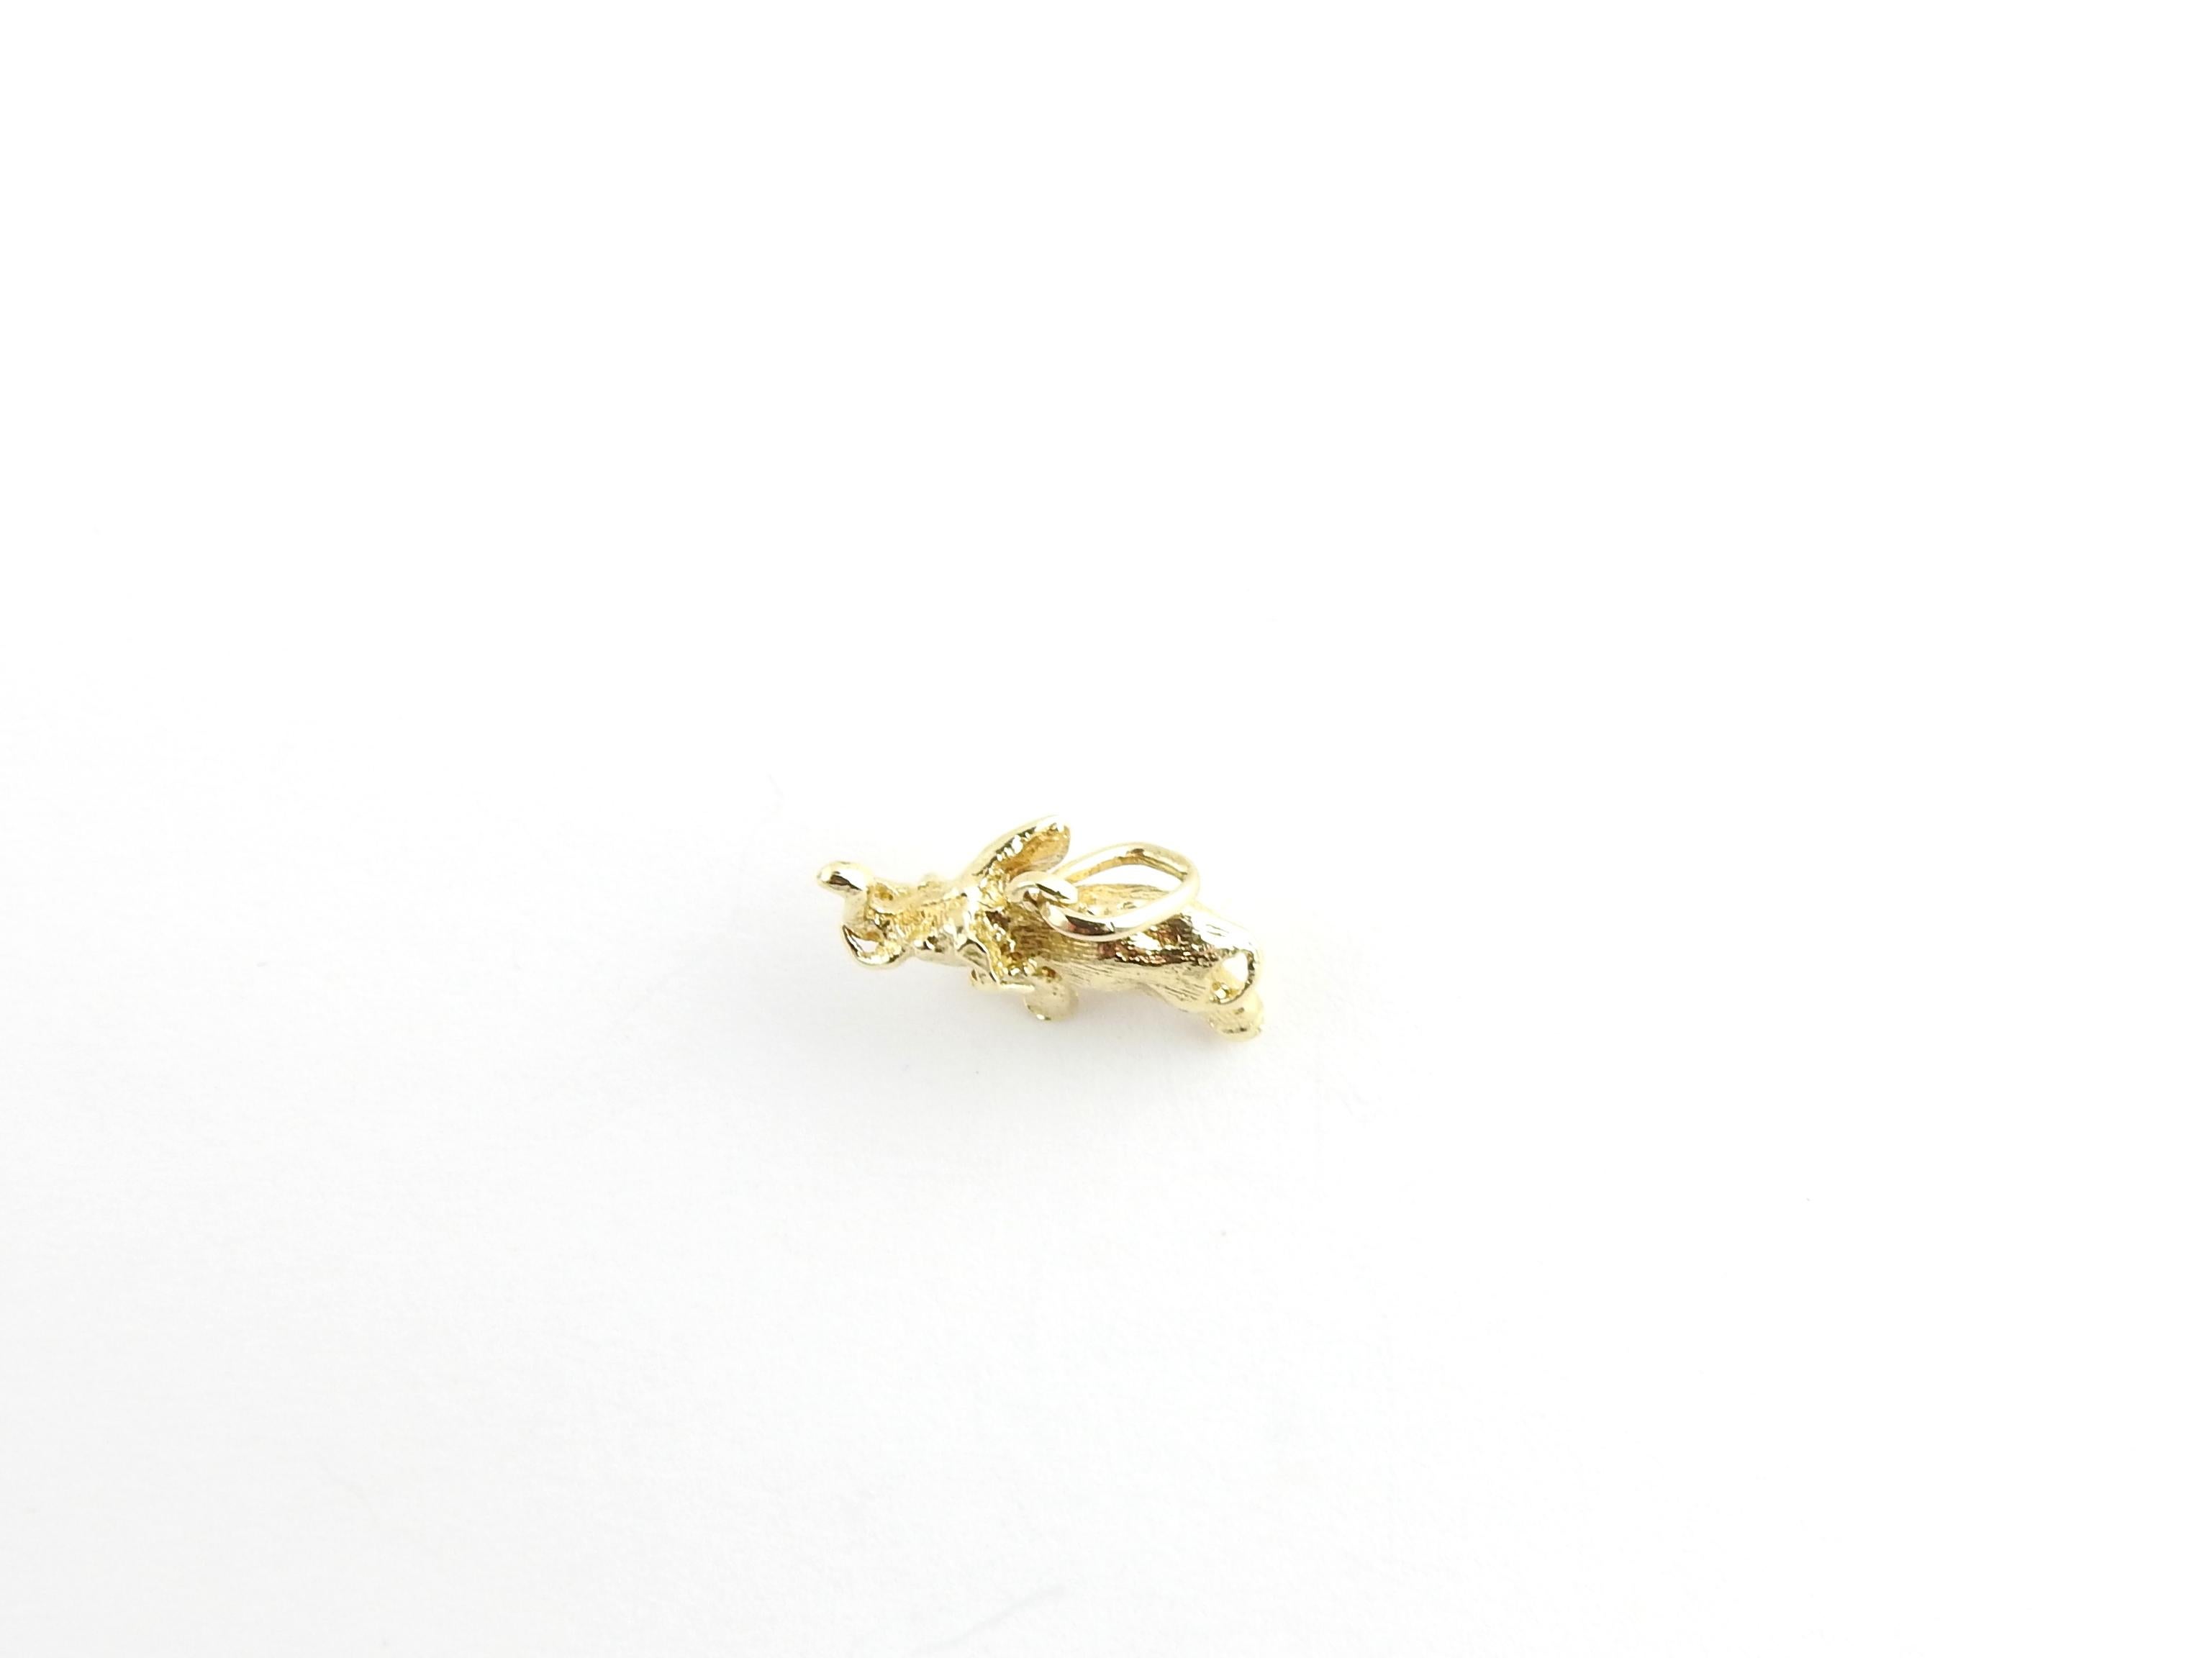 Vintage 14 Karat Yellow Gold Elephant Charm

Elephants are thought to bring luck, prosperity and happiness!

This lovely 3D charm features a miniature elephant with upturned trunk meticulously detailed in 14K yellow gold.

Size: 10 mm x 15 mm 